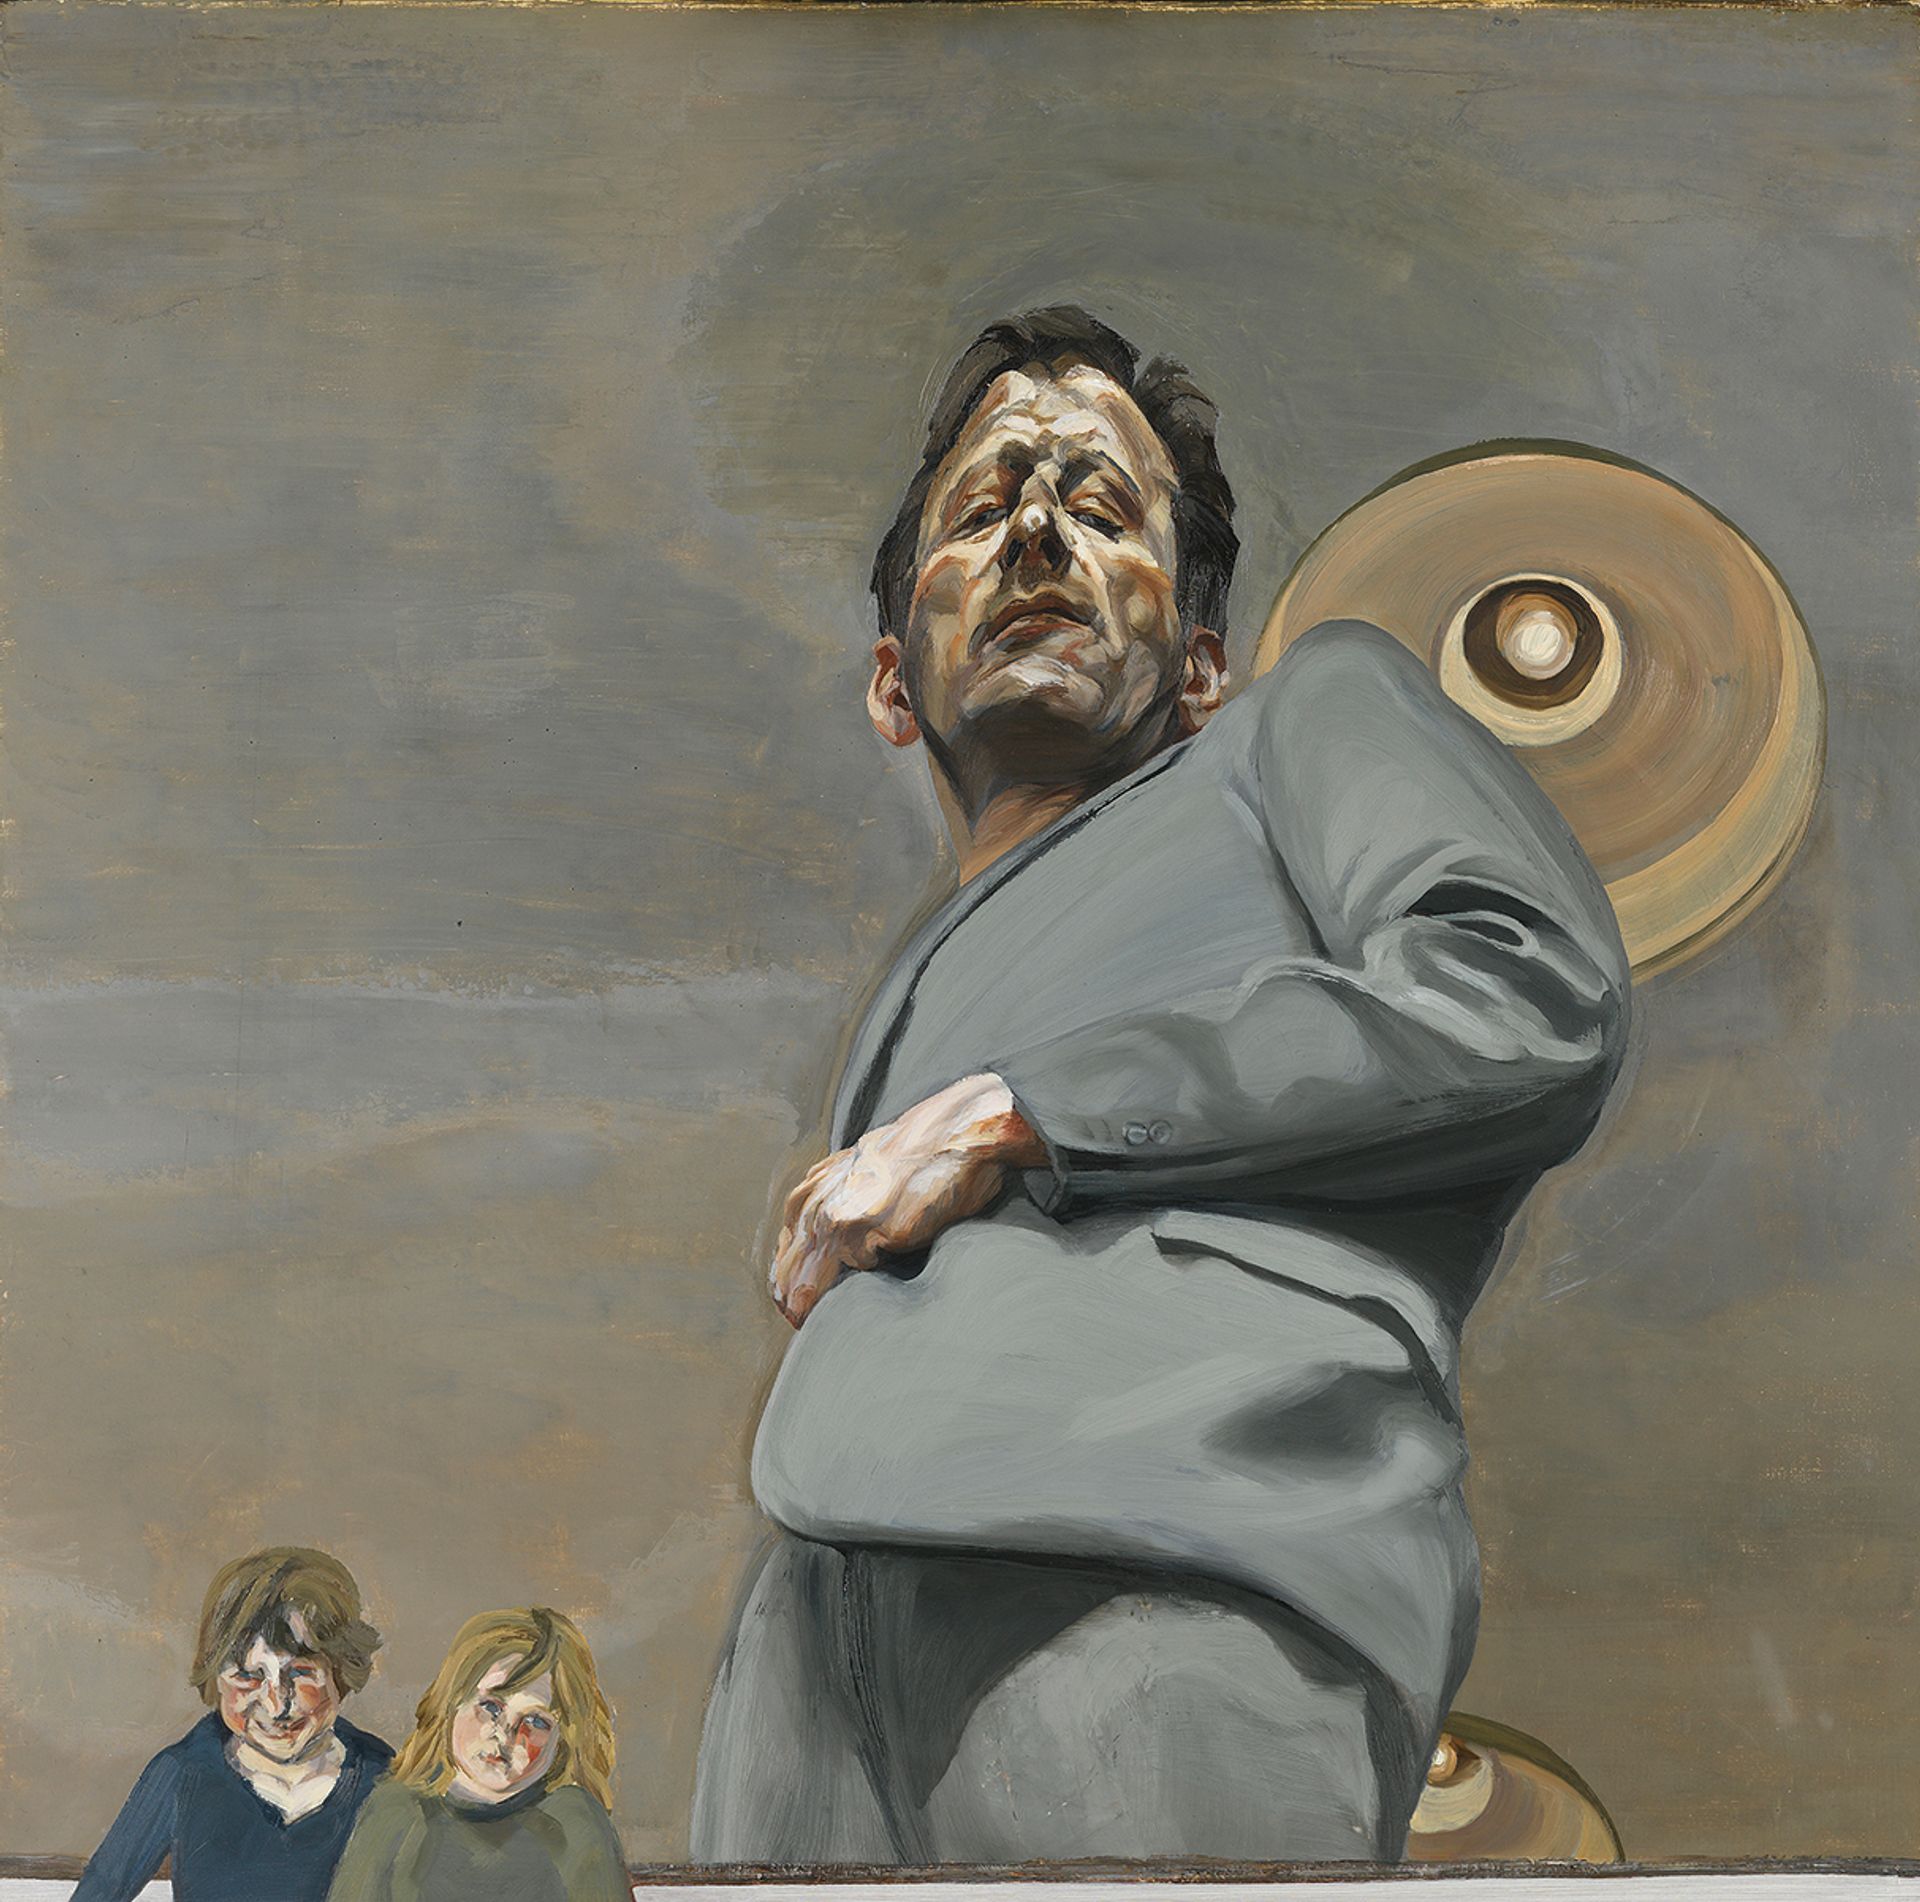 Freud’s Reflection with Two Children (Self-portrait) (1965) will be exhibited at the National Gallery © The Lucian Freud Archive / photo Museo Nacional Thyssen-Bornemisza, Madrid